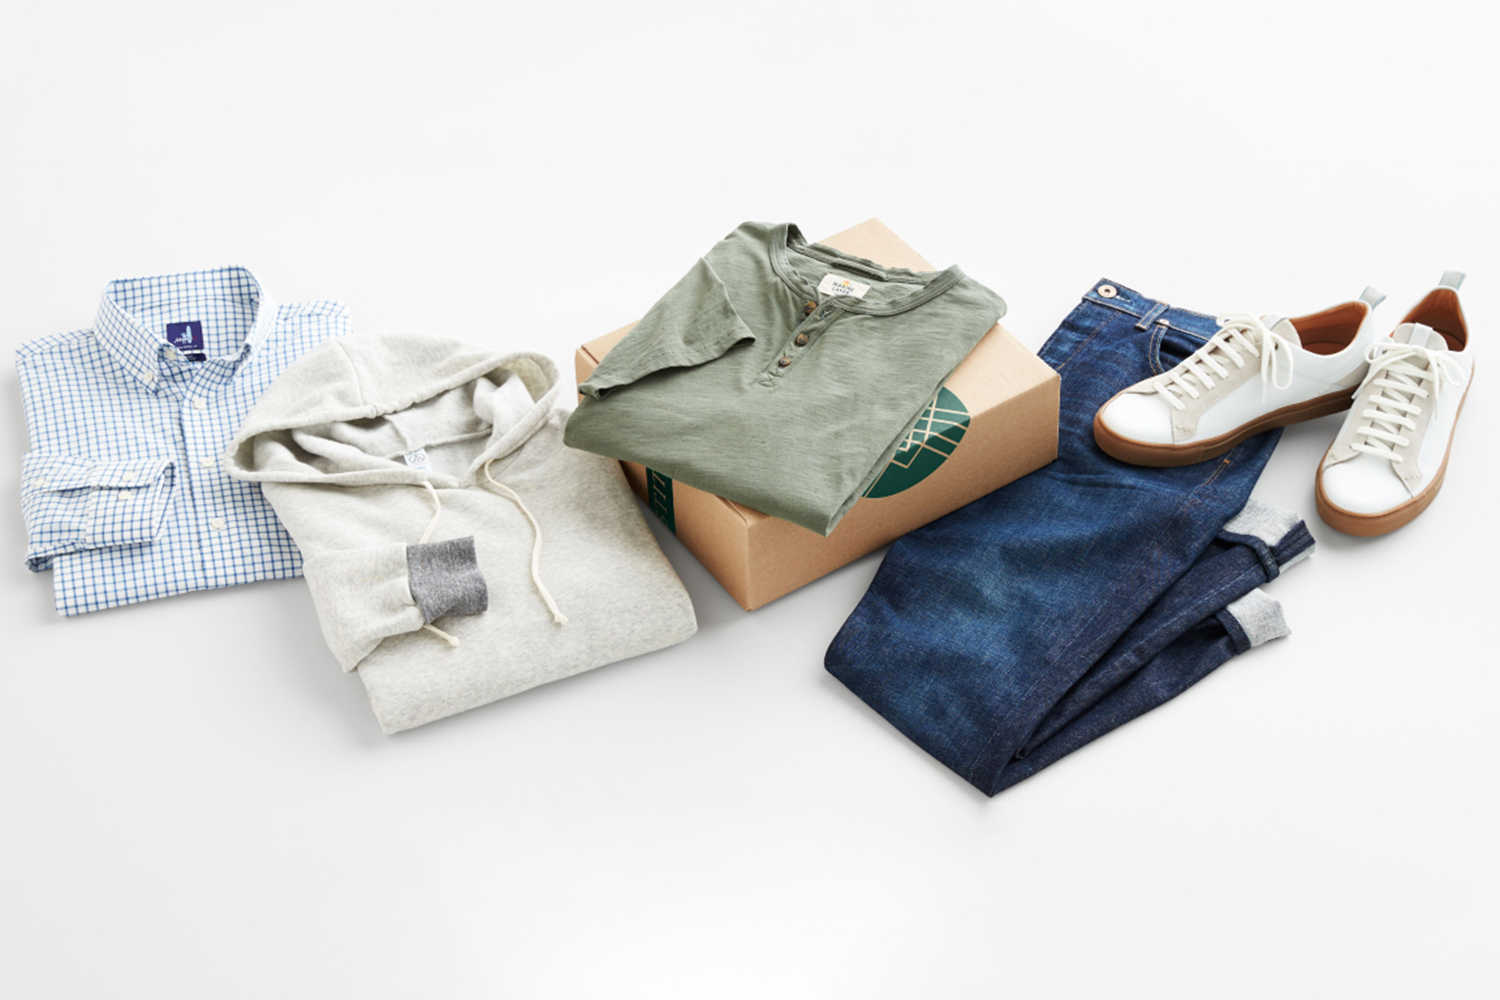 How Much Is Stitch Fix? - The Manual